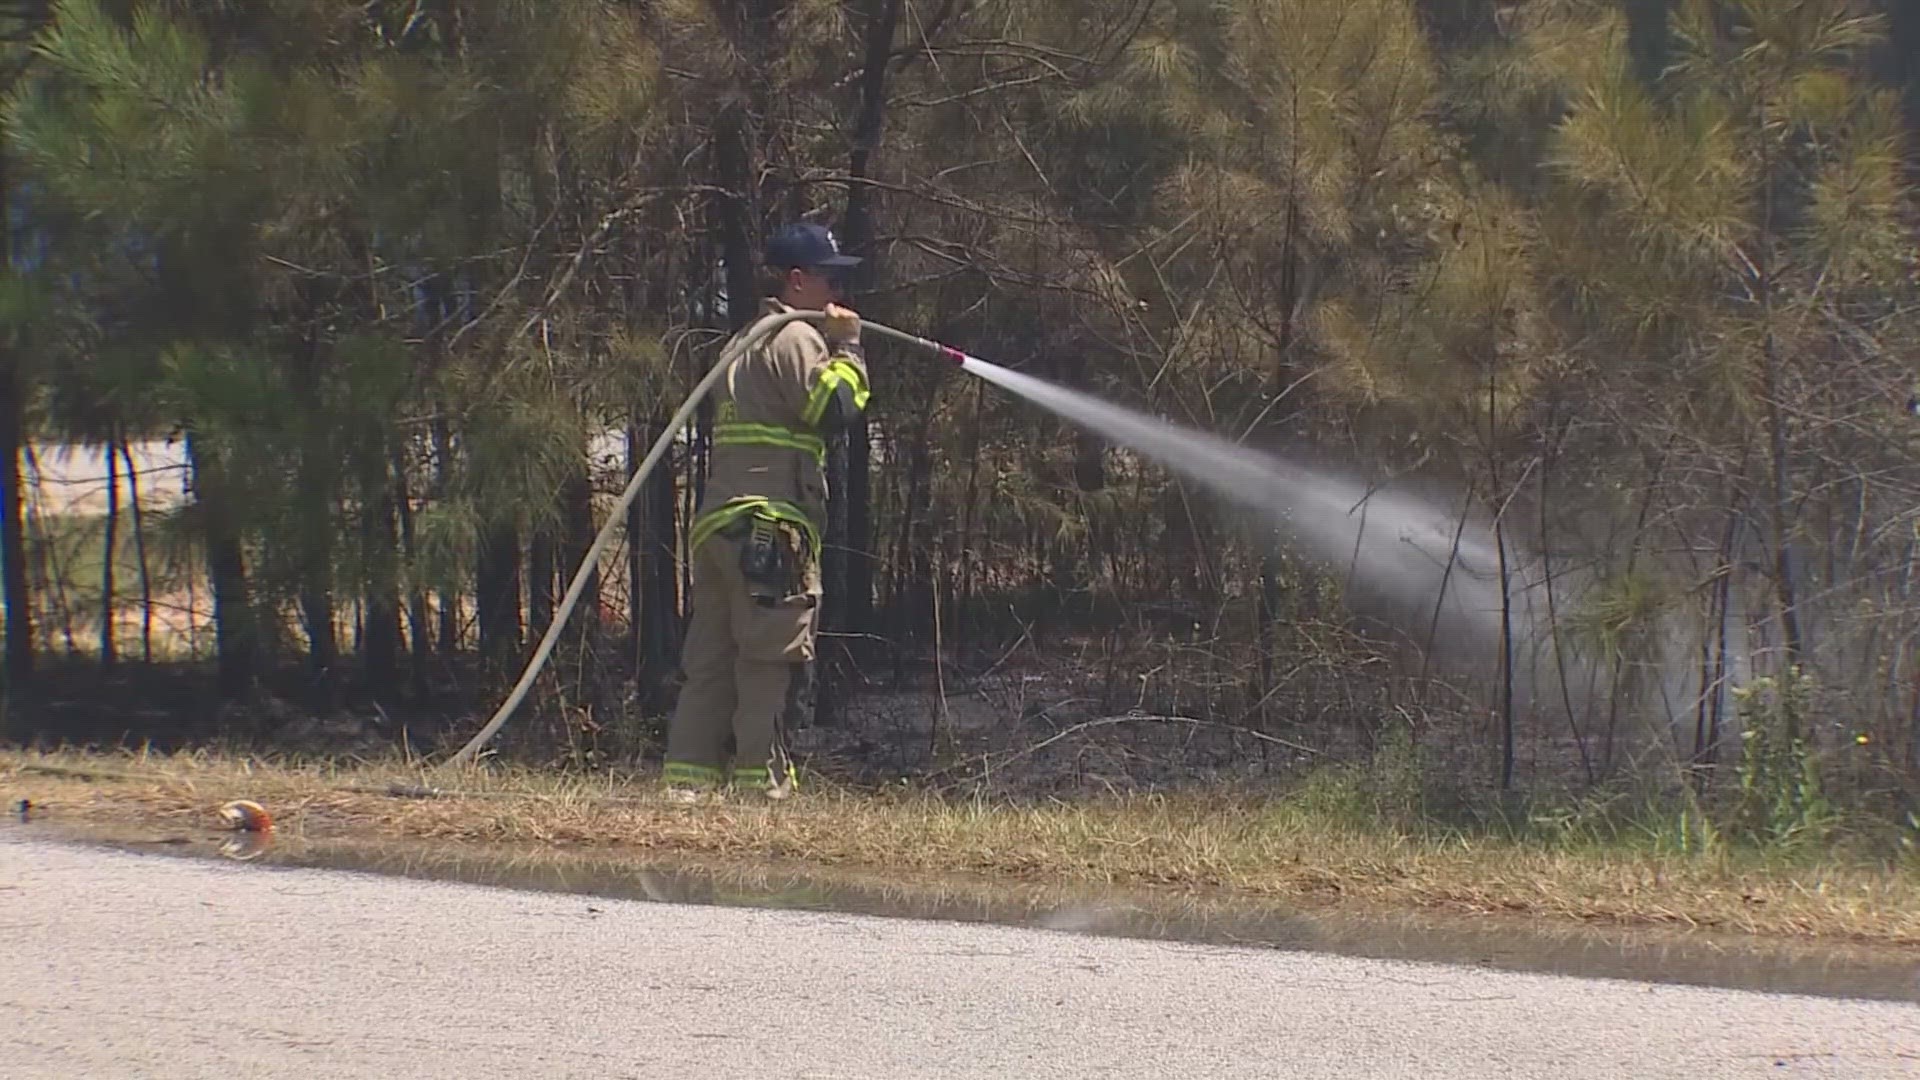 In Montgomery County, the Porter Fire Department responded to two grass fires within the past two days. A fire near Kingwood came close to homes off Loop 494.